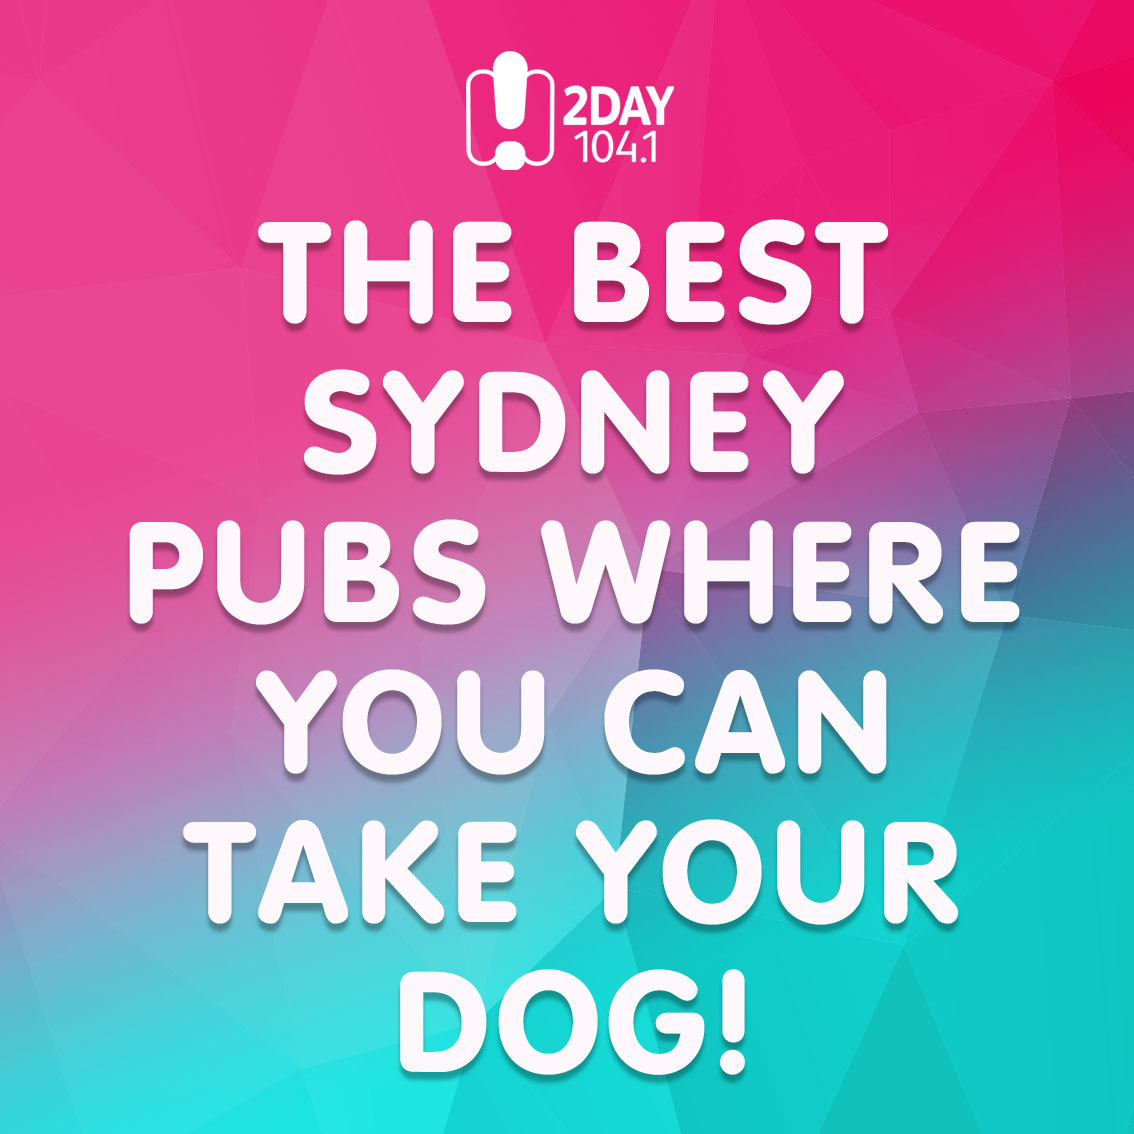 The Best Sydney Pubs Where You Can Take Your Dog!